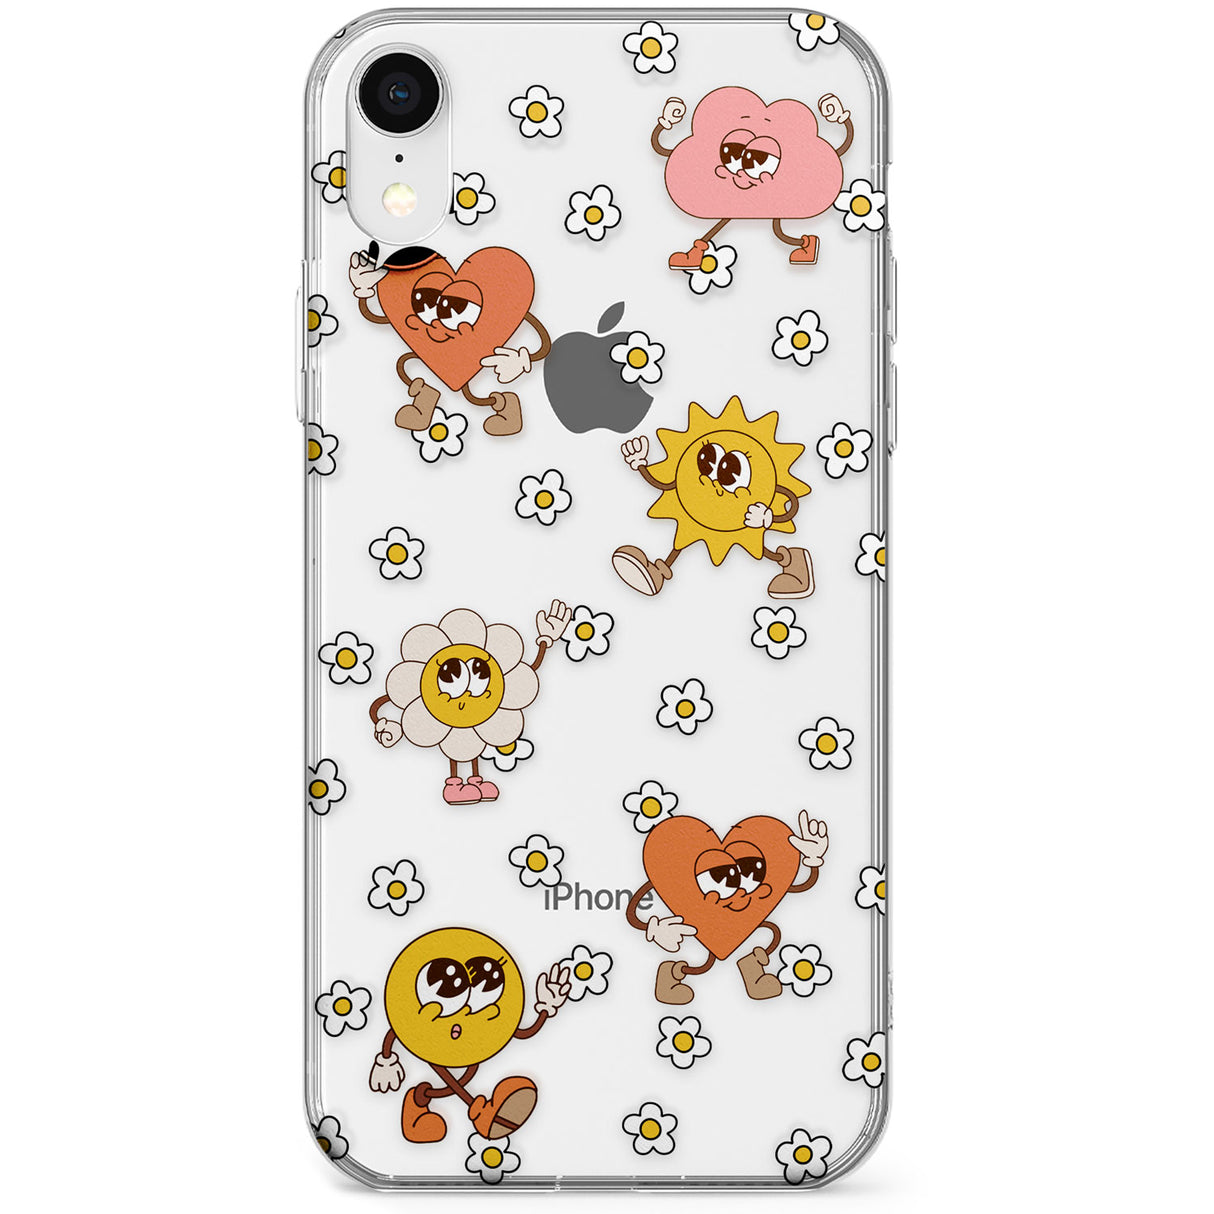 Daisies & Friends Phone Case for iPhone X, XS Max, XR